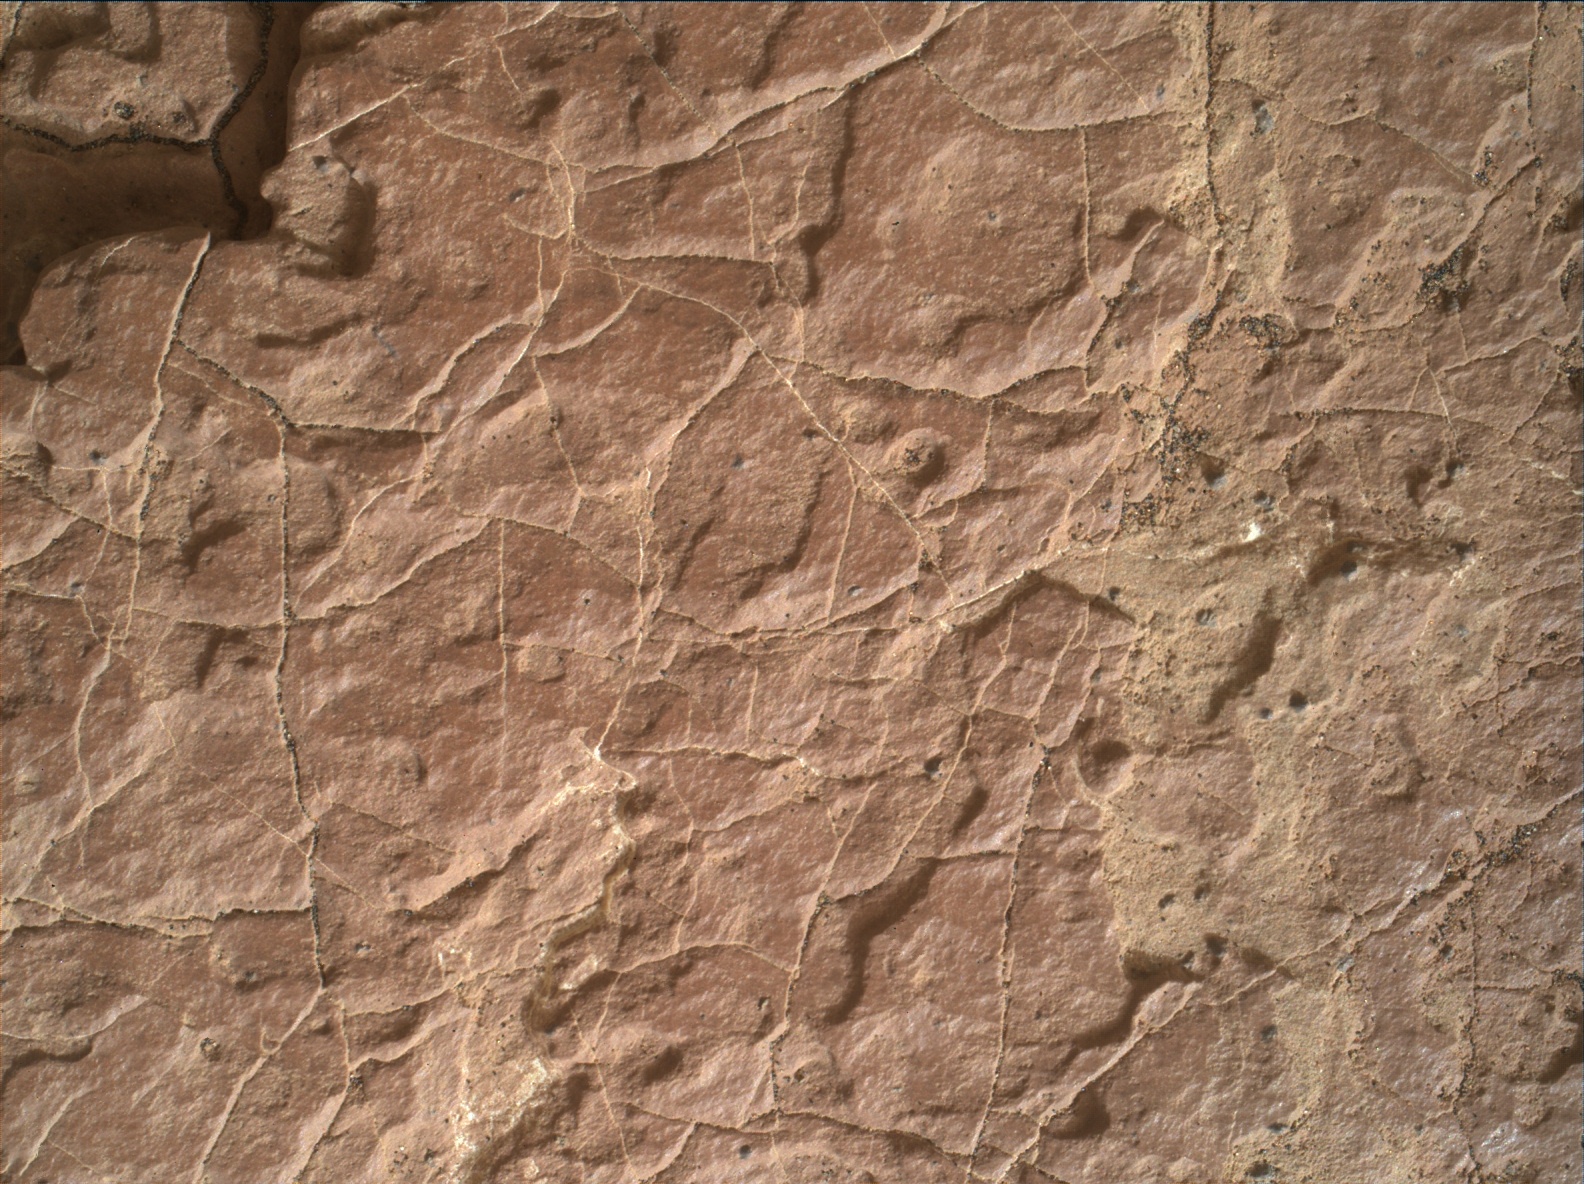 Nasa's Mars rover Curiosity acquired this image using its Mars Hand Lens Imager (MAHLI) on Sol 1635